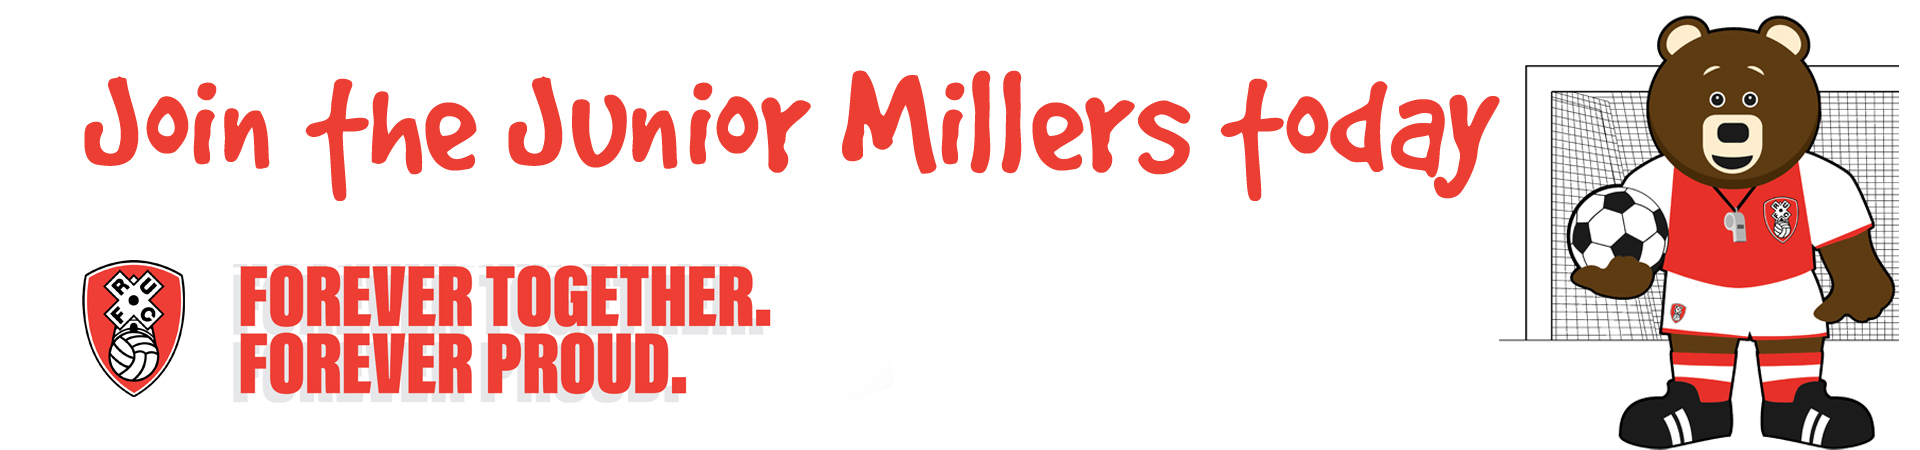 Join the Junior Millers